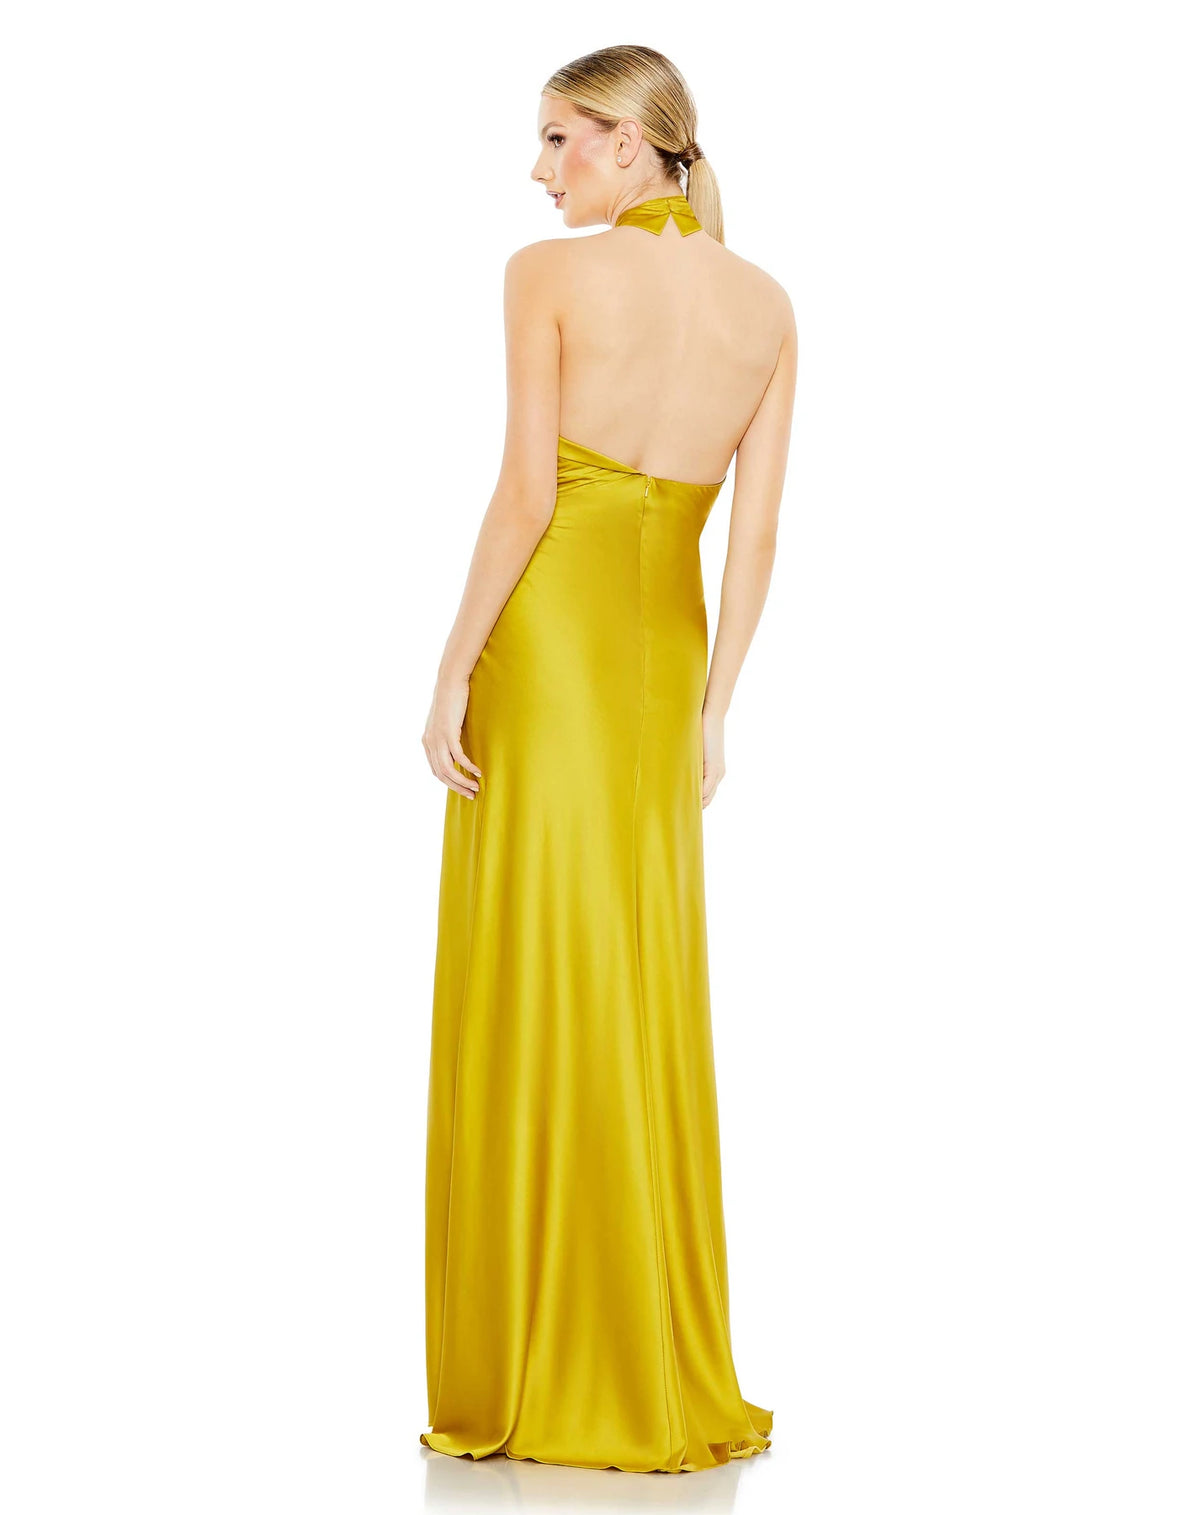 Made in a stunning shade of chartreuse, this elegant and sophisticated, silky satin gown features a twister halter neck, fitted body and one sexy thigh high split formed from a sexy train.  The dress, with its show-stopping colour will be sure to have all eyes on you back view